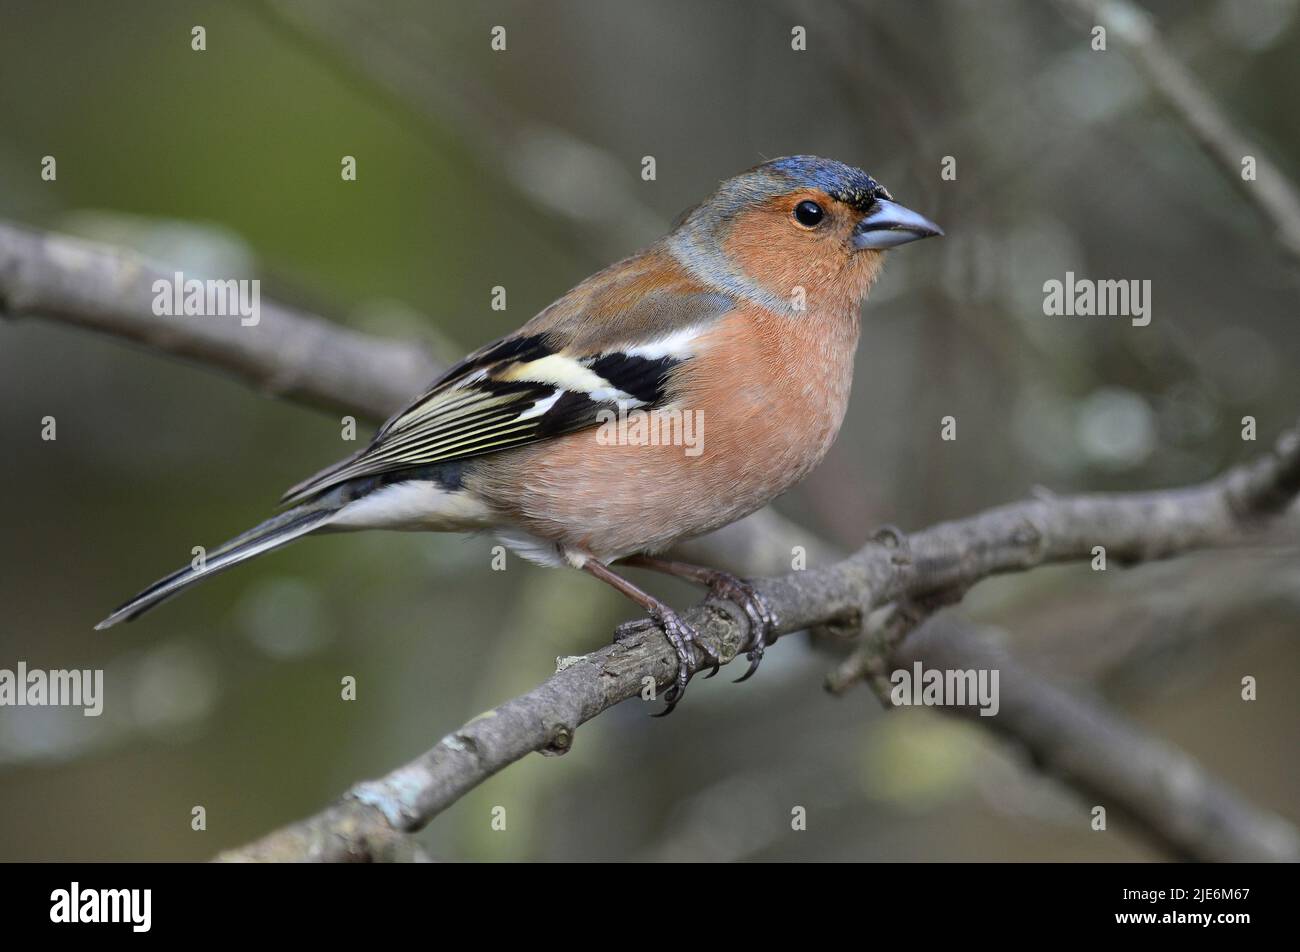 Adult male chaffinch perched on tree branch in spring Stock Photo